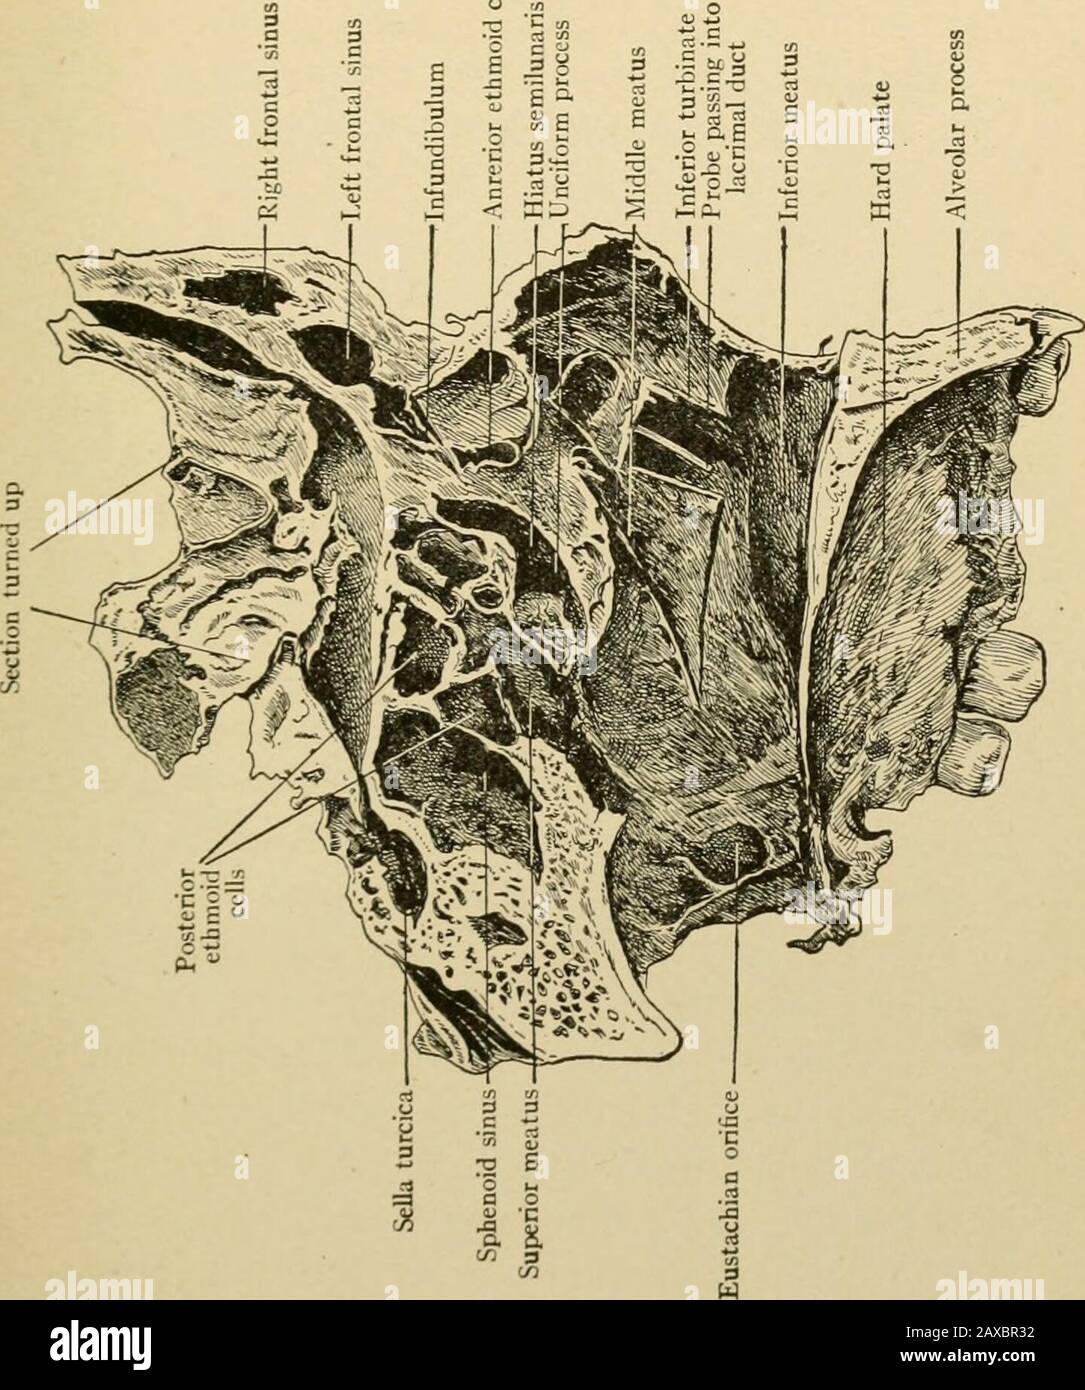 Applied anatomy and oral surgery for dental students . n, the crests of the maxillary and palate bones, therostrum of the sphenoid, and the nasal spine of thefrontal bones assist in forming the nasal septum (Fig. 8). The bones entering into the formation of the lateralwall of the nasal chamber are: the nasal, the nasal processof the maxillary, the lacrimal, the ethmoid, the inferiorturbinated, the palate, and the pterygoid process andbody of the sphenoid. The inferior turbinated bone and the turbinatedprocesses of the ethmoid bone divide the lateral wall ofthe nasal chamber into several horizo Stock Photo